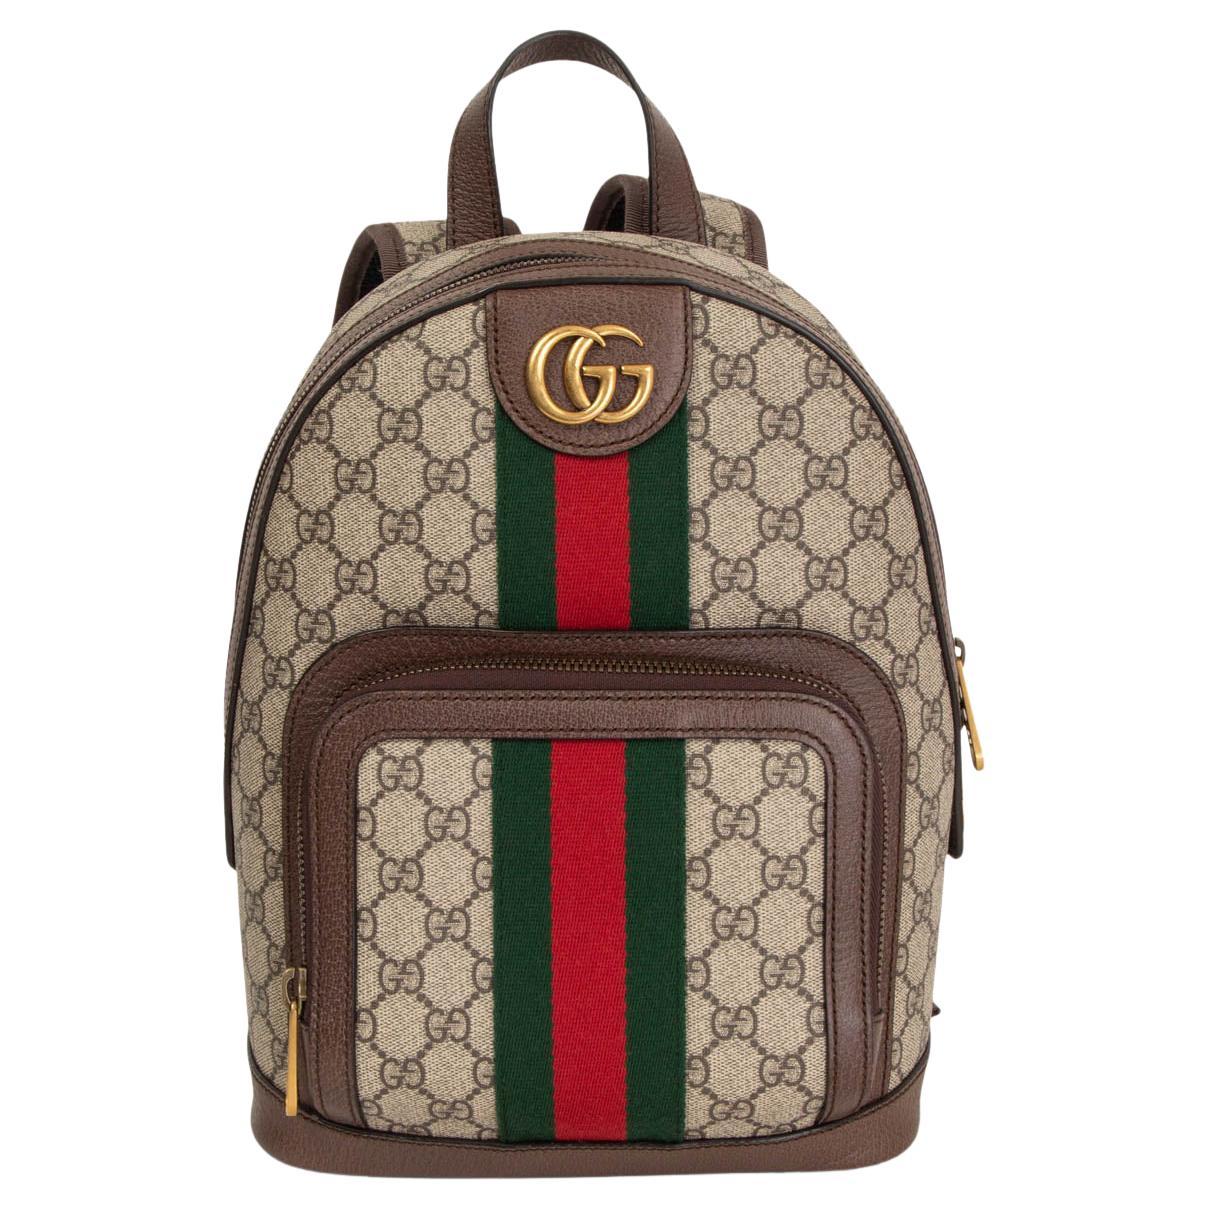 GUCCI beige GG SUPREME OPHIDIA GG FLORAL SMALL Backpack Bag